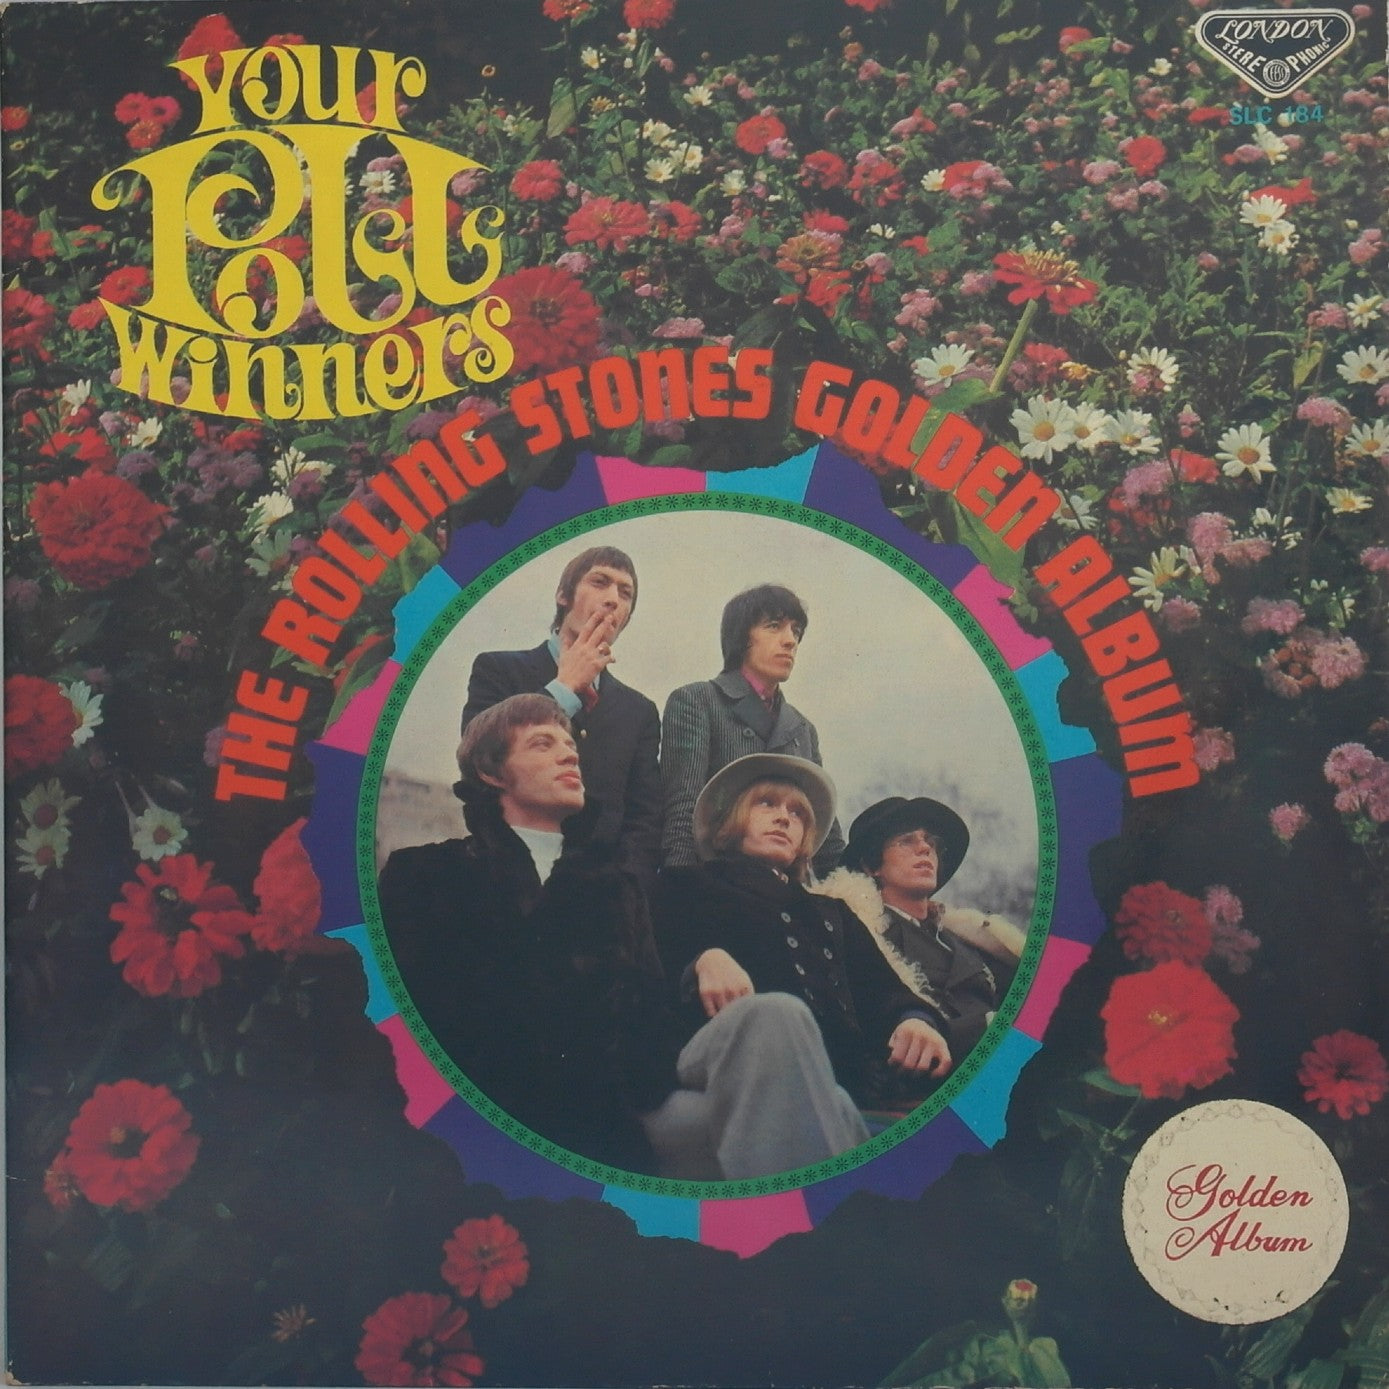 THE ROLLING STONES - Your Poll Winners: The Rolling Stones Golden Album